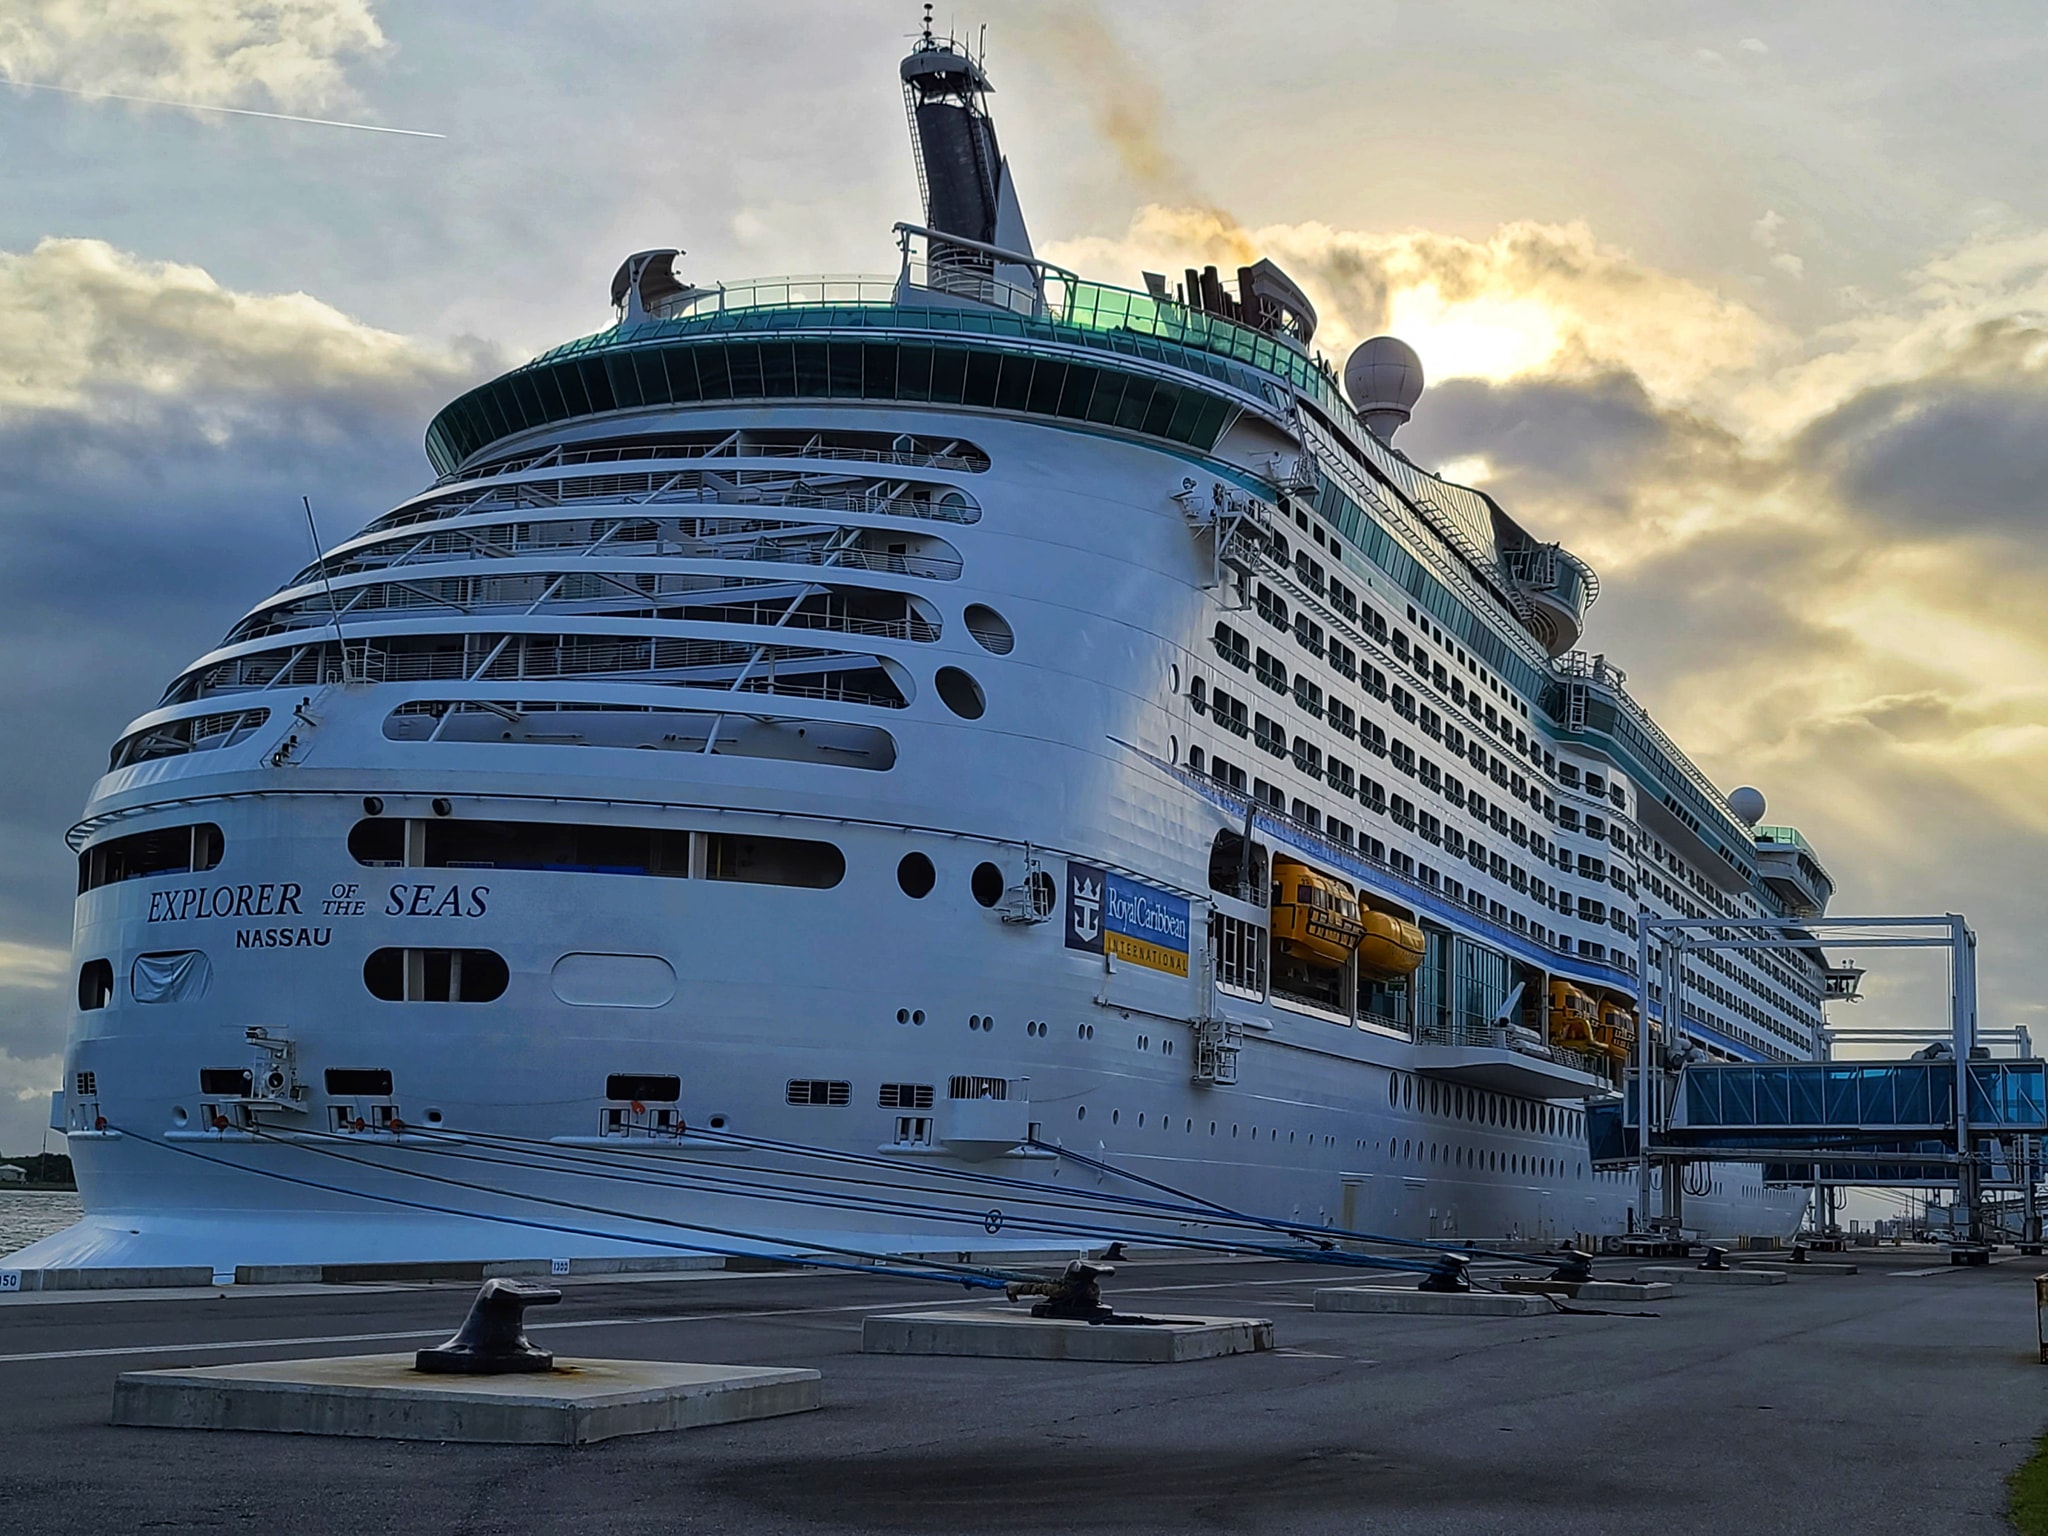 Explorer of the Seas in Port Canaveral